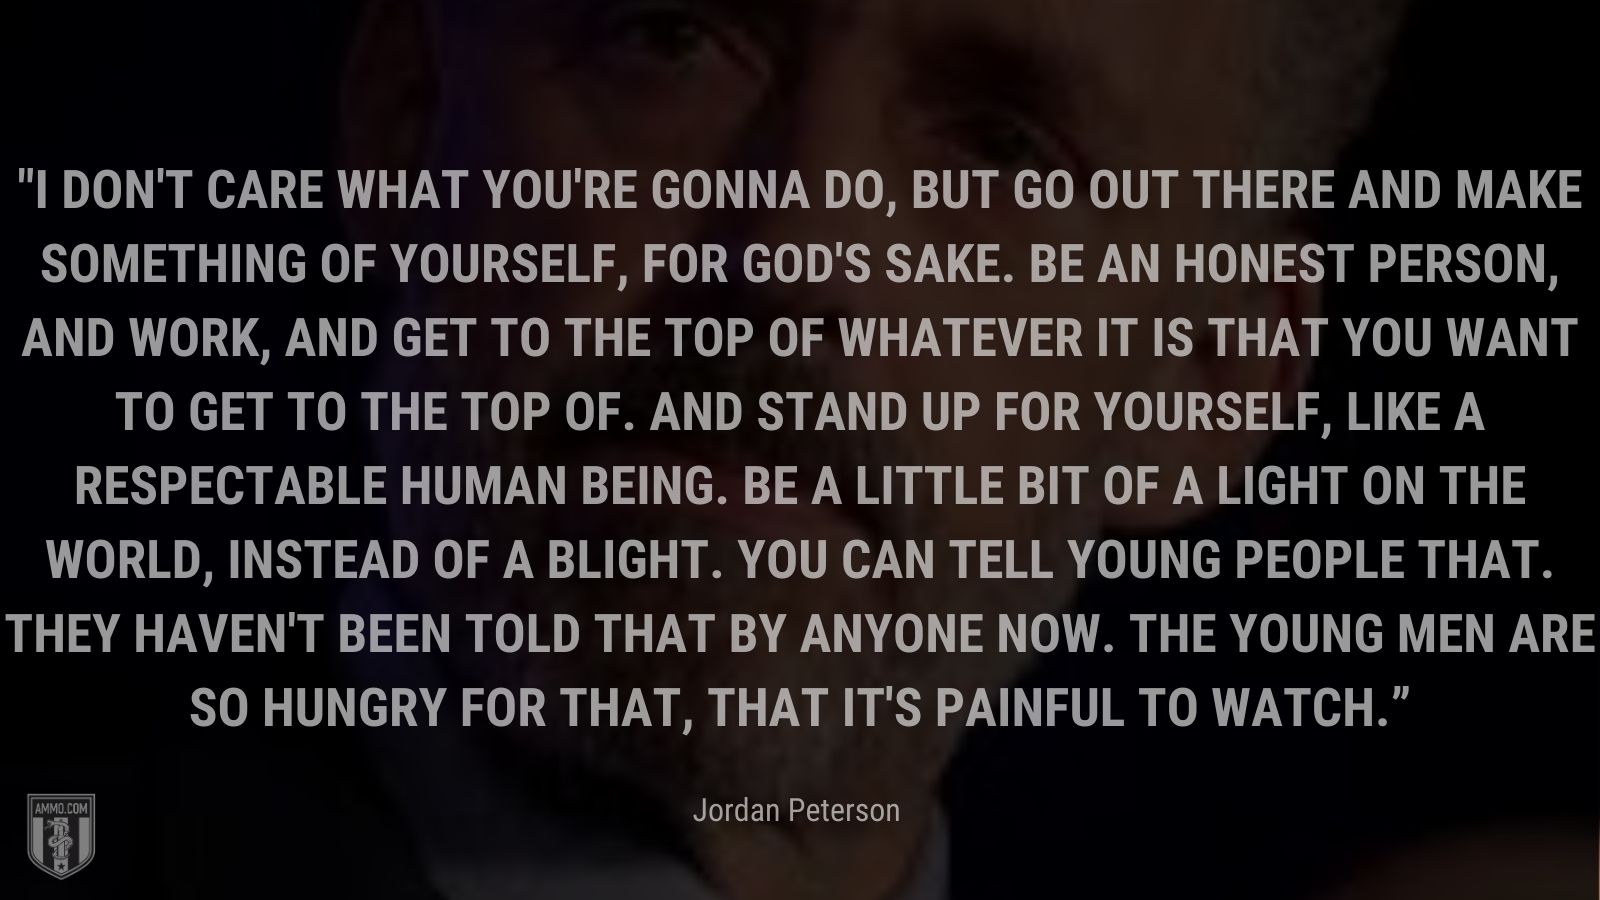 “I don't care what you're gonna do, but go out there and make something of yourself, for God's sake. Be an honest person, and work, and get to the top of whatever it is that you want to get to the top of. And stand up for yourself, like a respectable human being. Be a little bit of a light on the world, instead of a blight. You can tell young people that. They haven't been told that by anyone now. The young men are so hungry for that, that it's painful to watch.” - Jordan Peterson